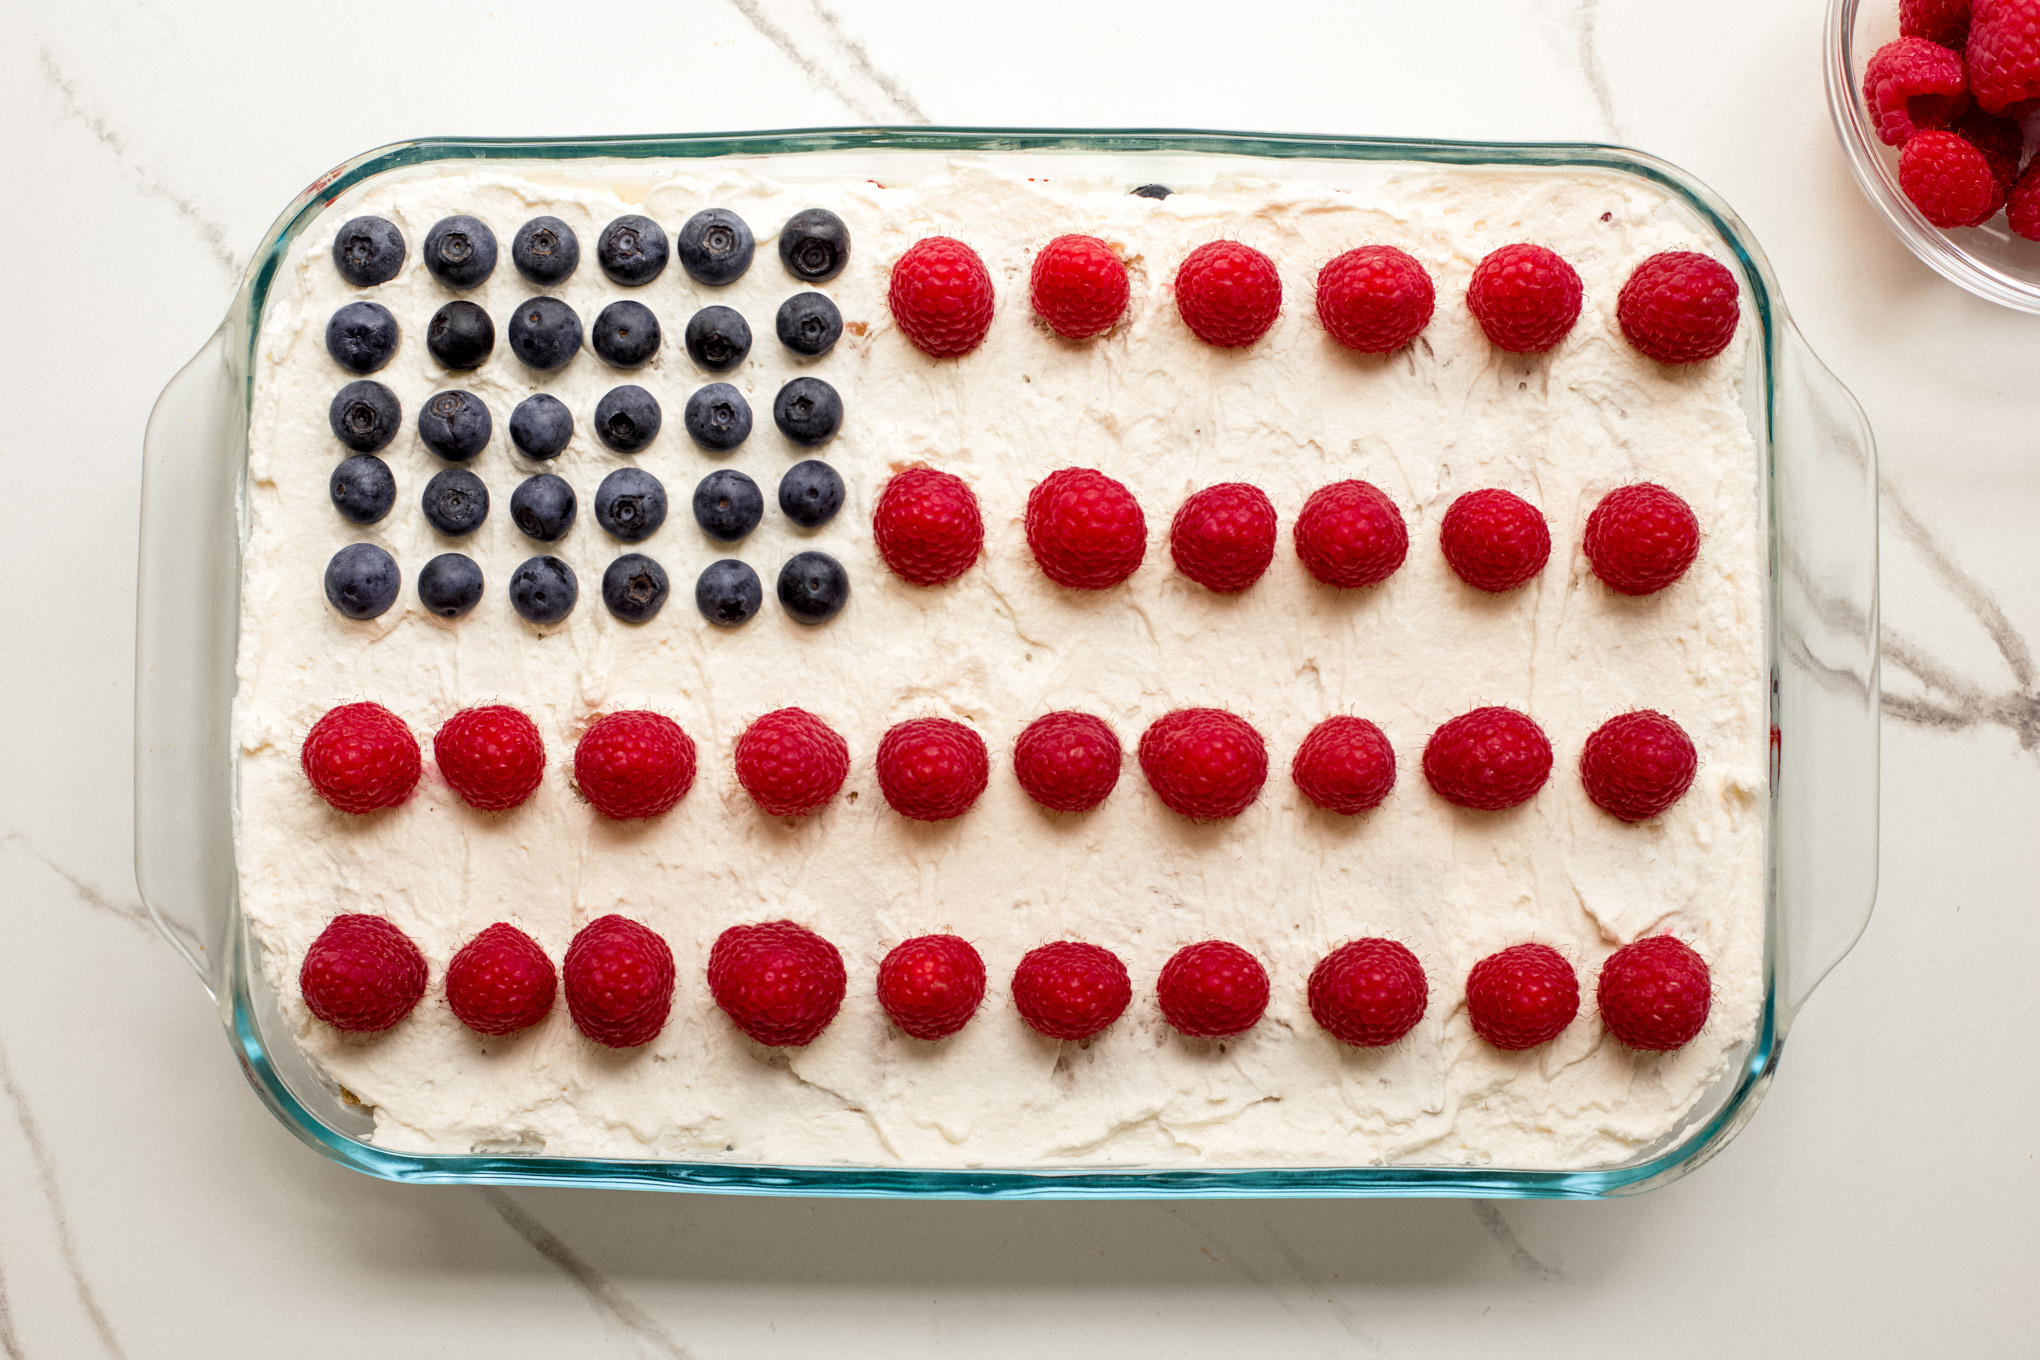 cake decorated with berries to look like American flag.